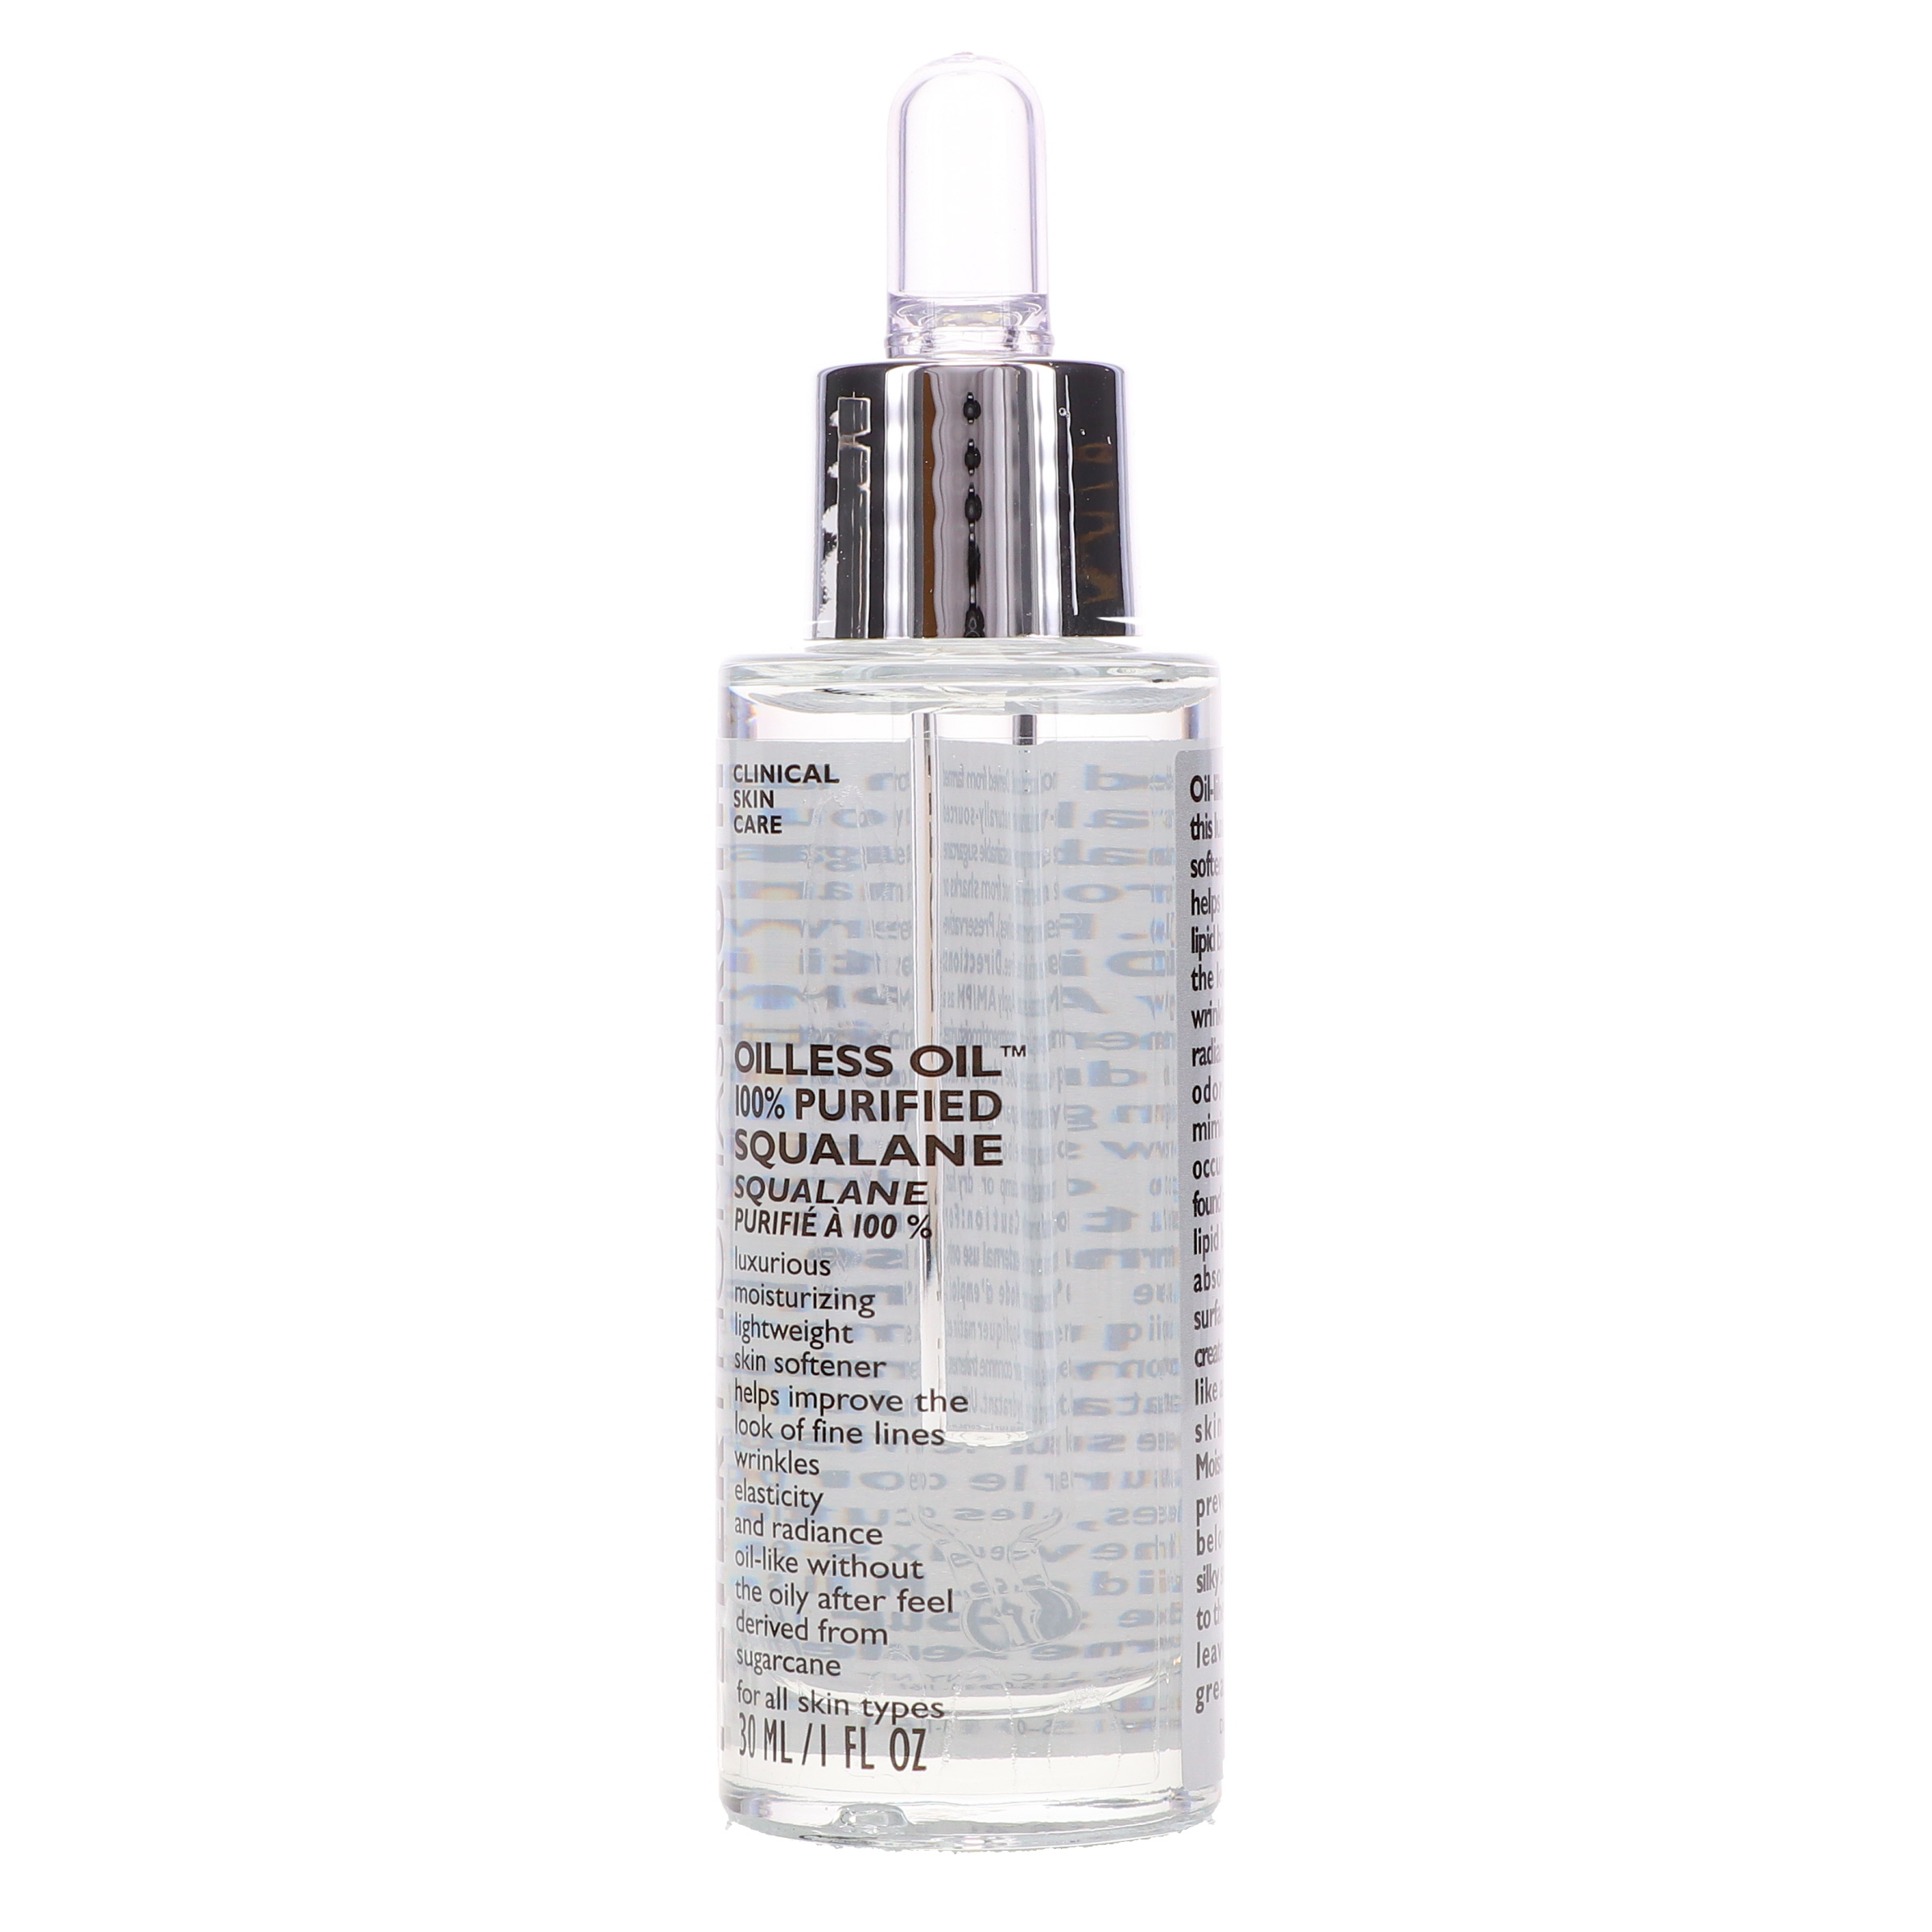 Peter Thomas Roth 100% Purified Squalane Oilless Oil 1 oz - image 2 of 8